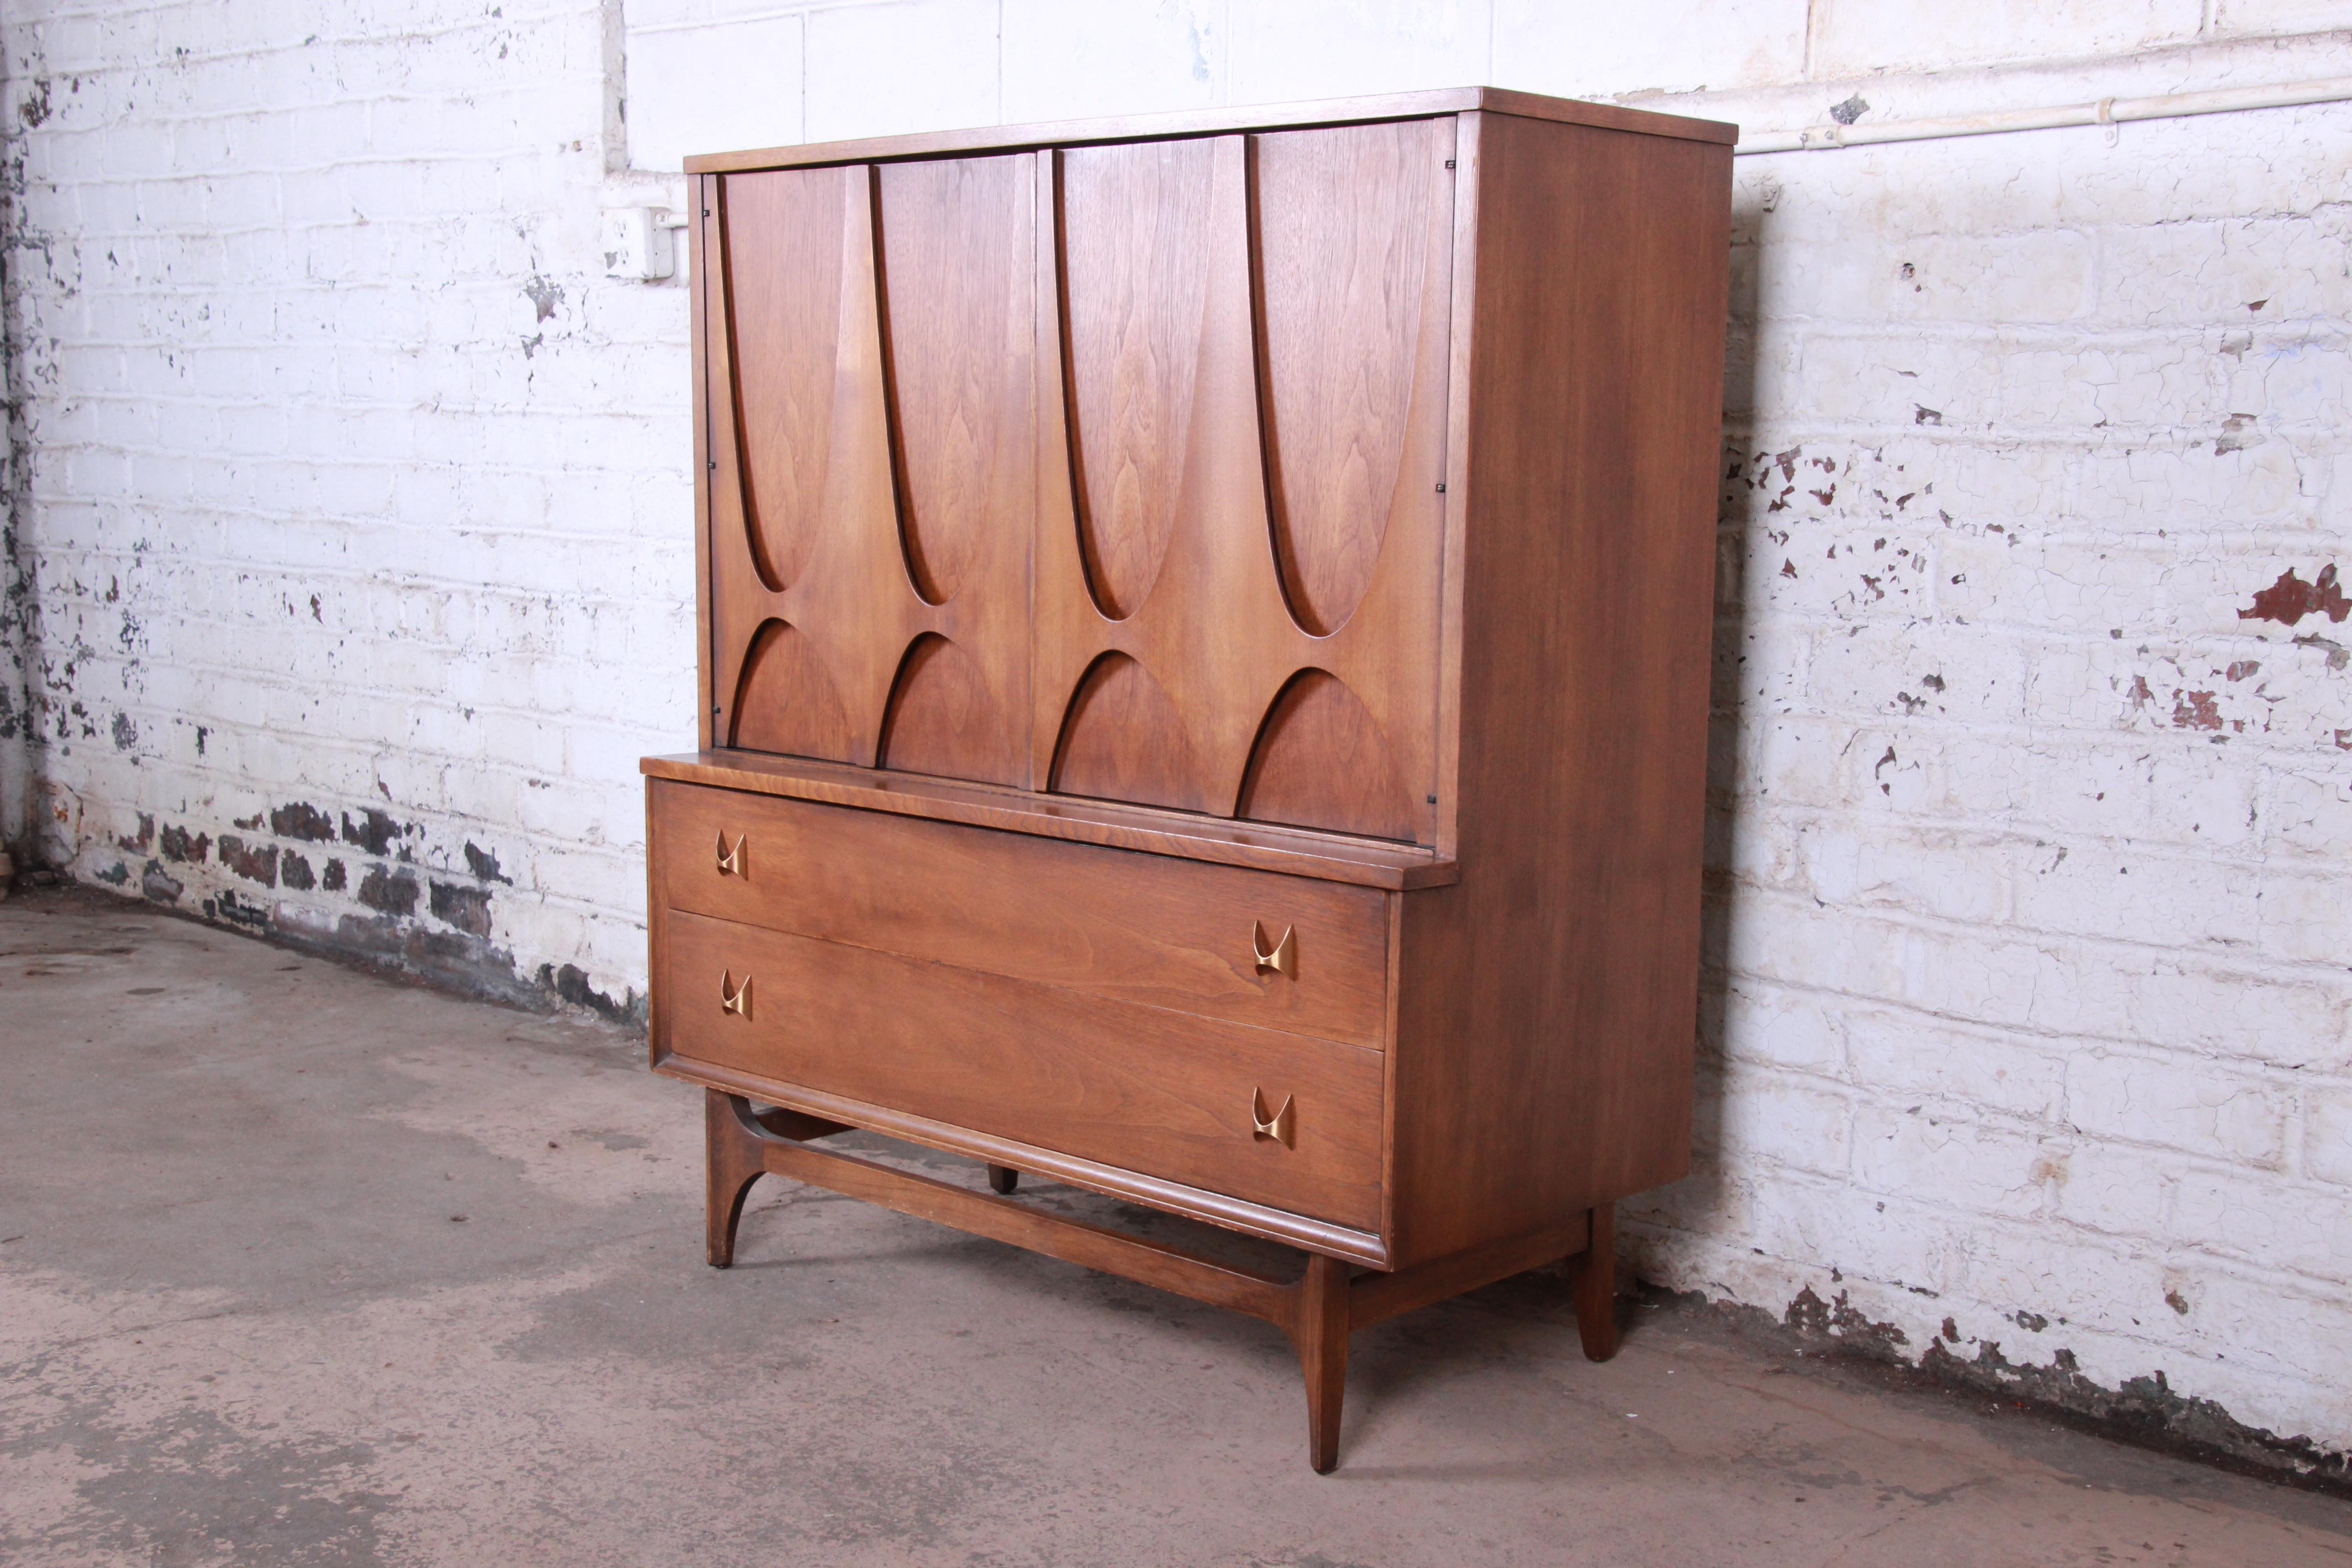 An exceptional and iconic Mid-Century Modern sculpted walnut gentleman's chest by Broyhill Brasilia. The chest has gorgeous walnut wood grain, sculpted arches, and original brass arch pulls. The two large cabinet doors open up to four dovetailed